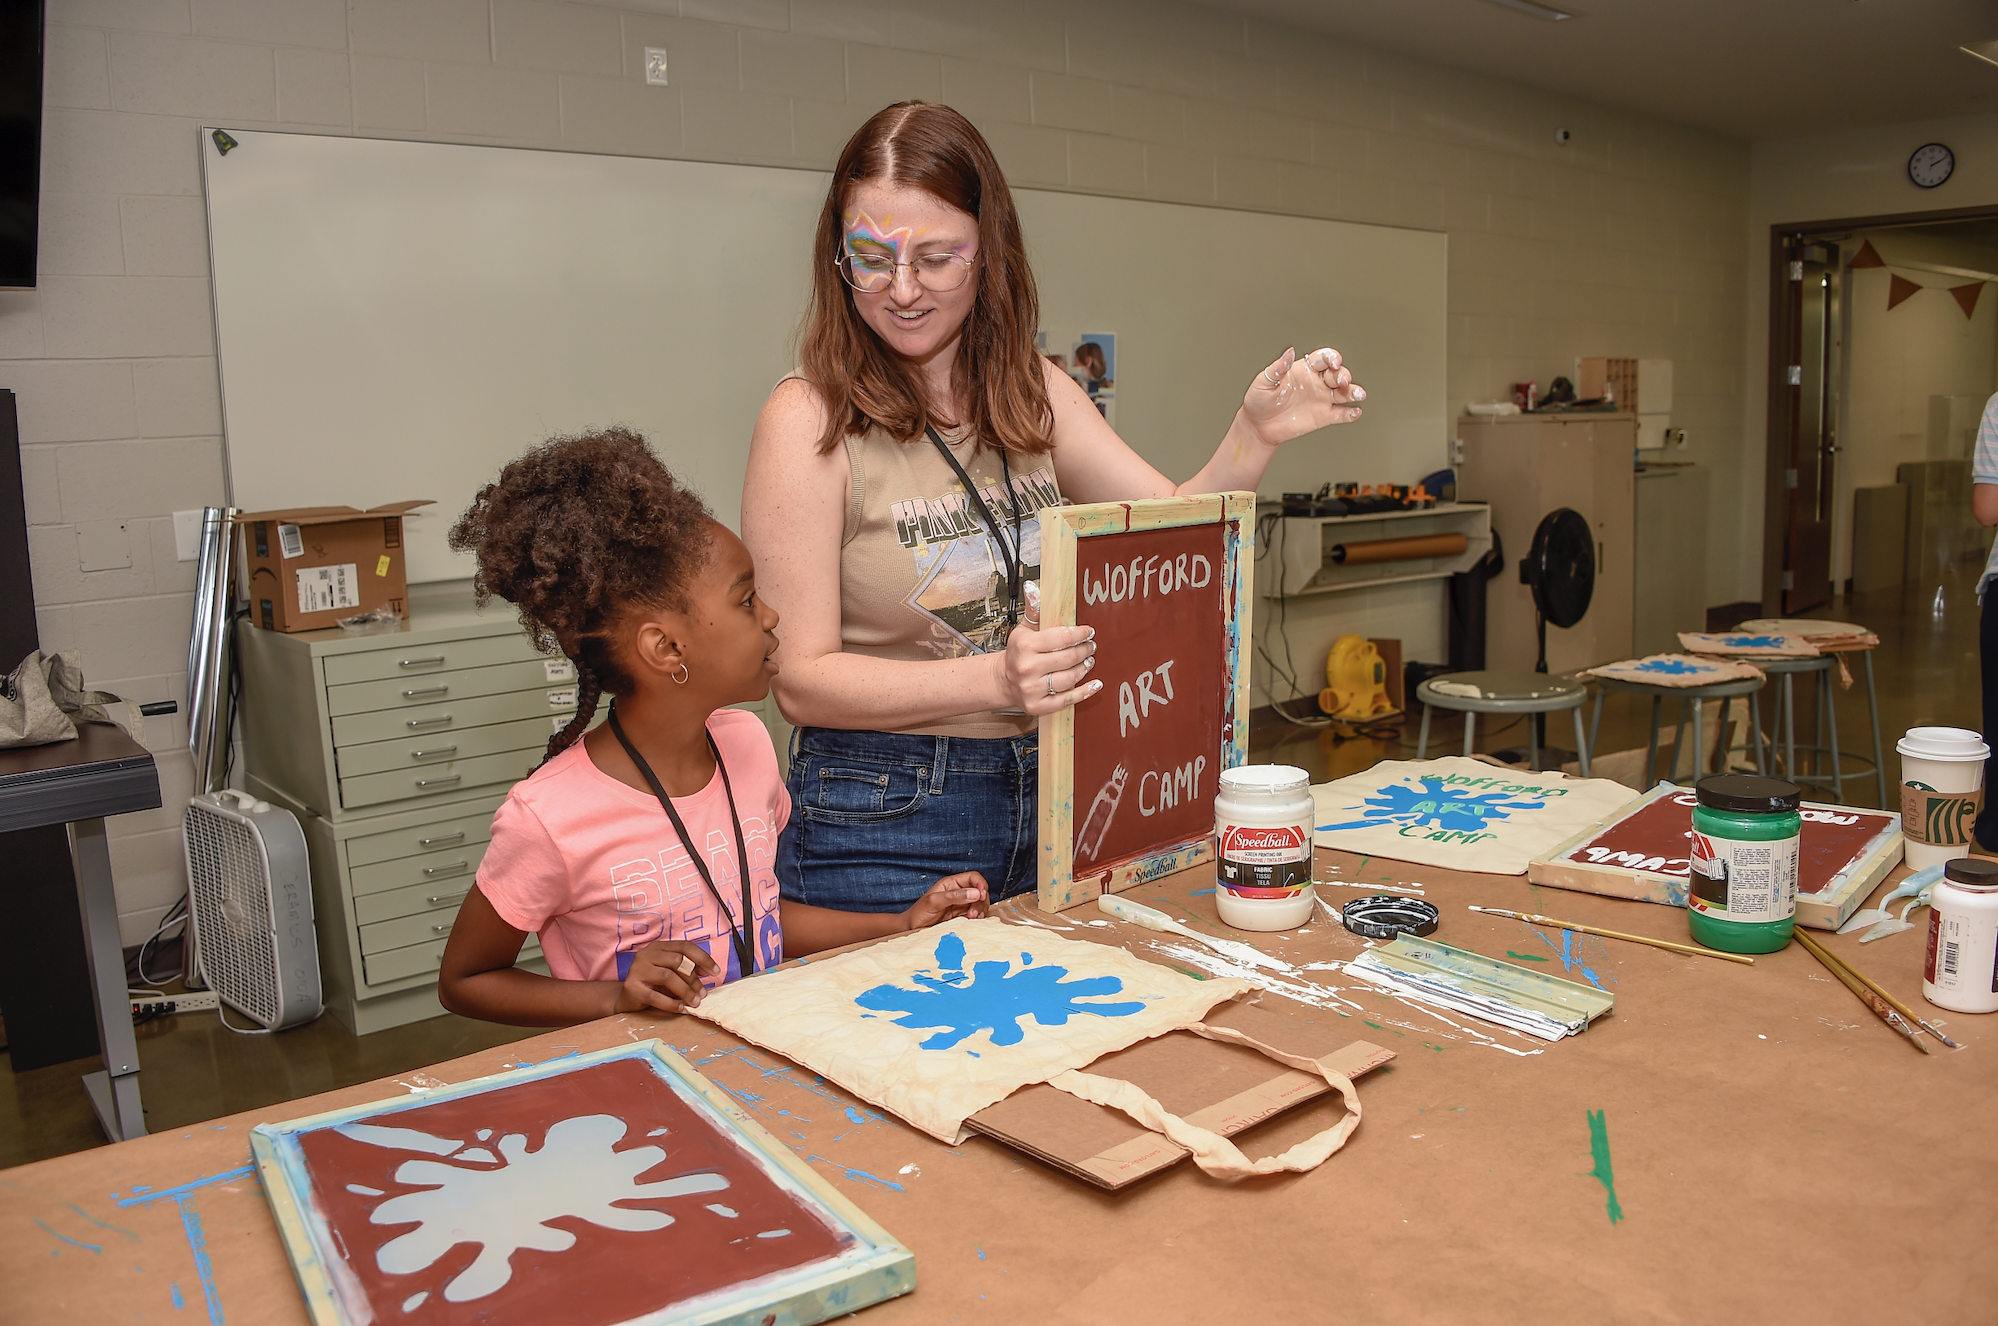 Wofford College's Blake Batten is using her passion for art to serve Spartanburg-area Boys & Girls Club students through a Wofford art camp.